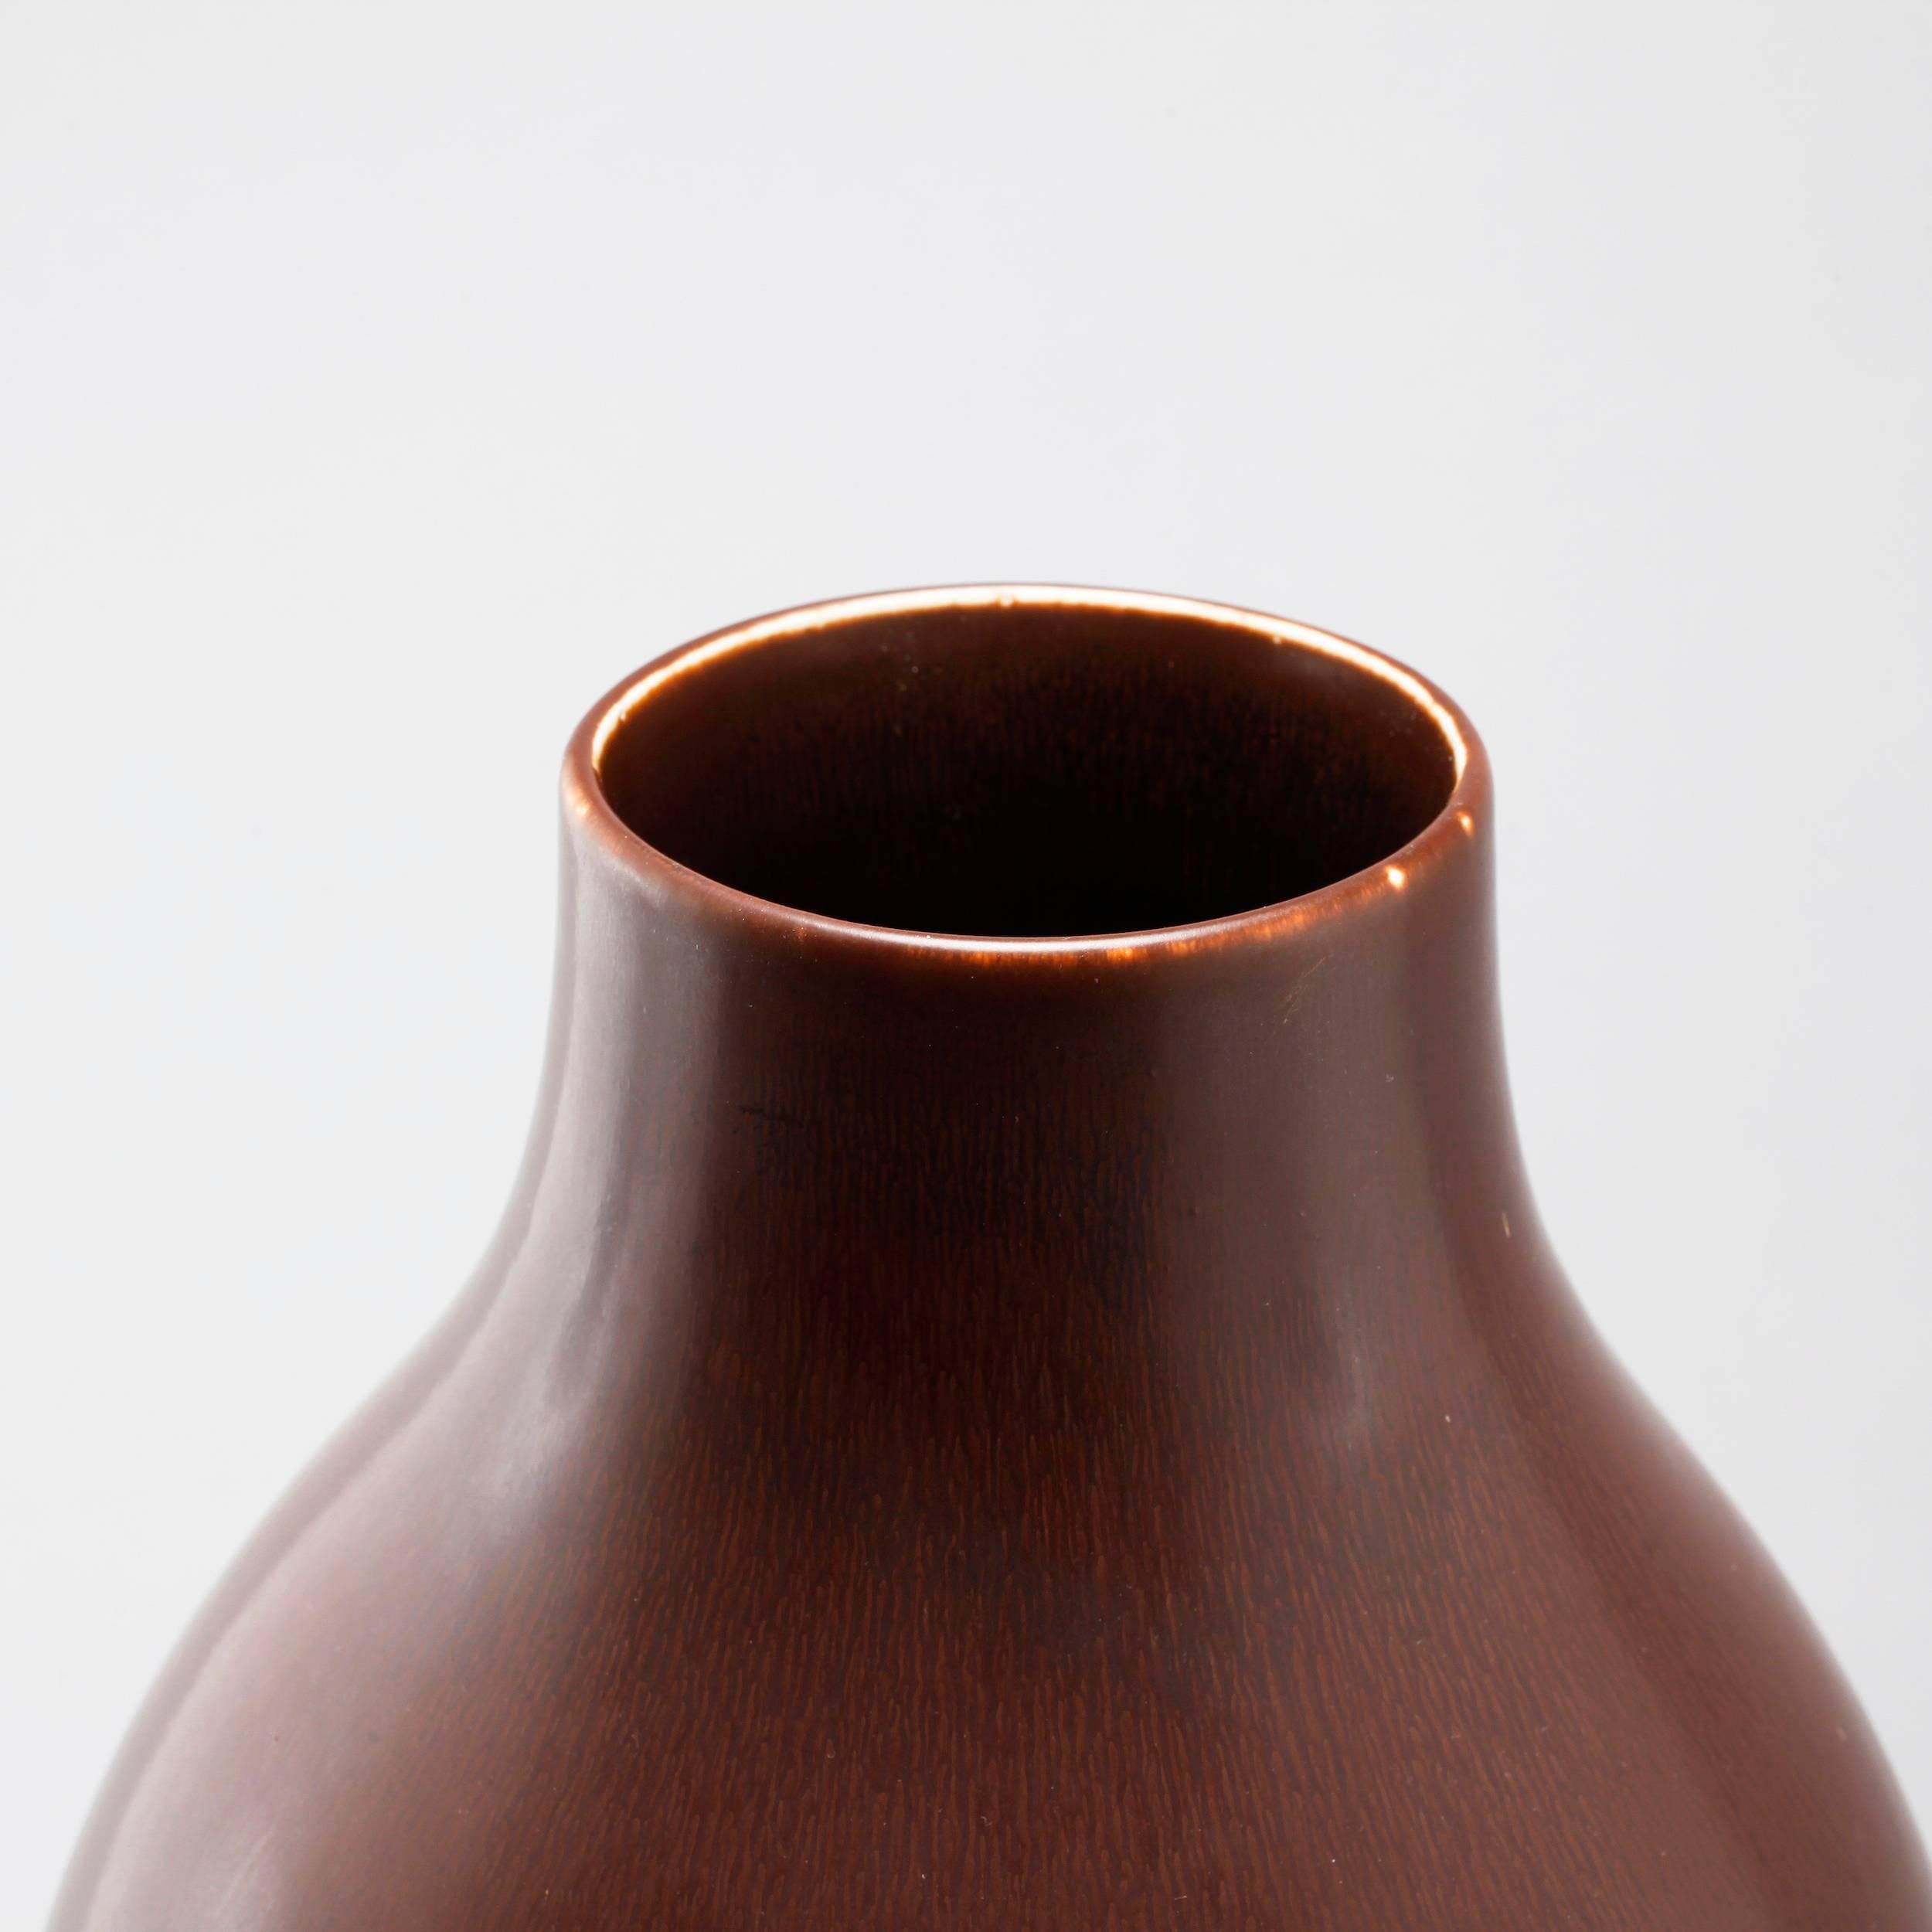 Carl Harry Stålhane, large stoneware vase in brown for Rörstrand, signed R Sweden CHS SDA. Measure: H 51 cm. Literature: Stalhane by Peter Eklund and Patrick Johansson, page 44.